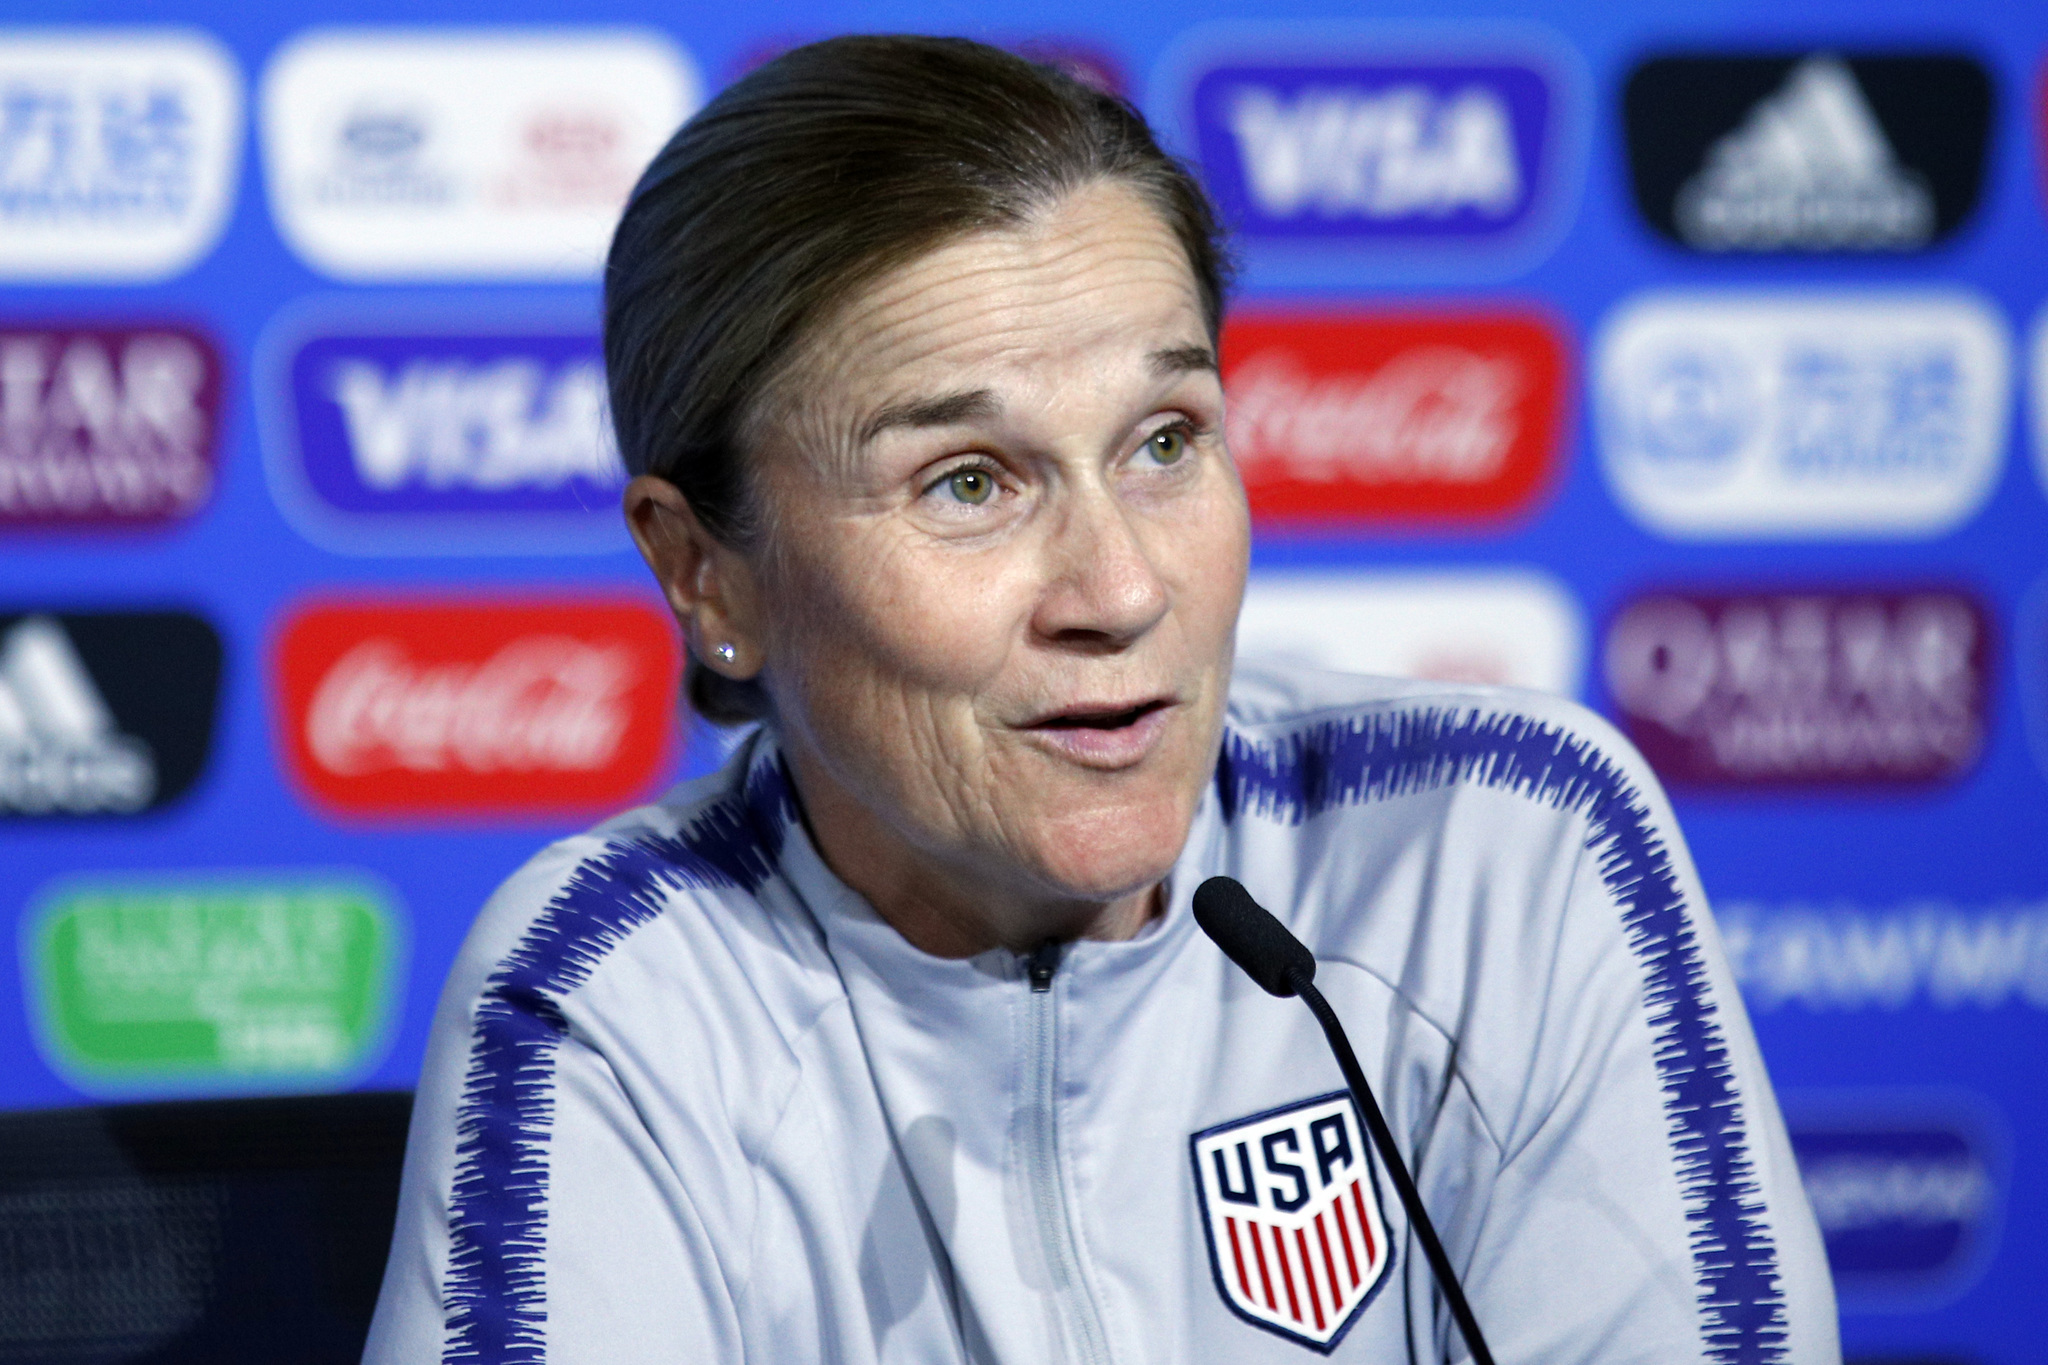 'Gone are the days of predictability': Former USWNT coach Jill Ellis on 'inspirational' World Cup